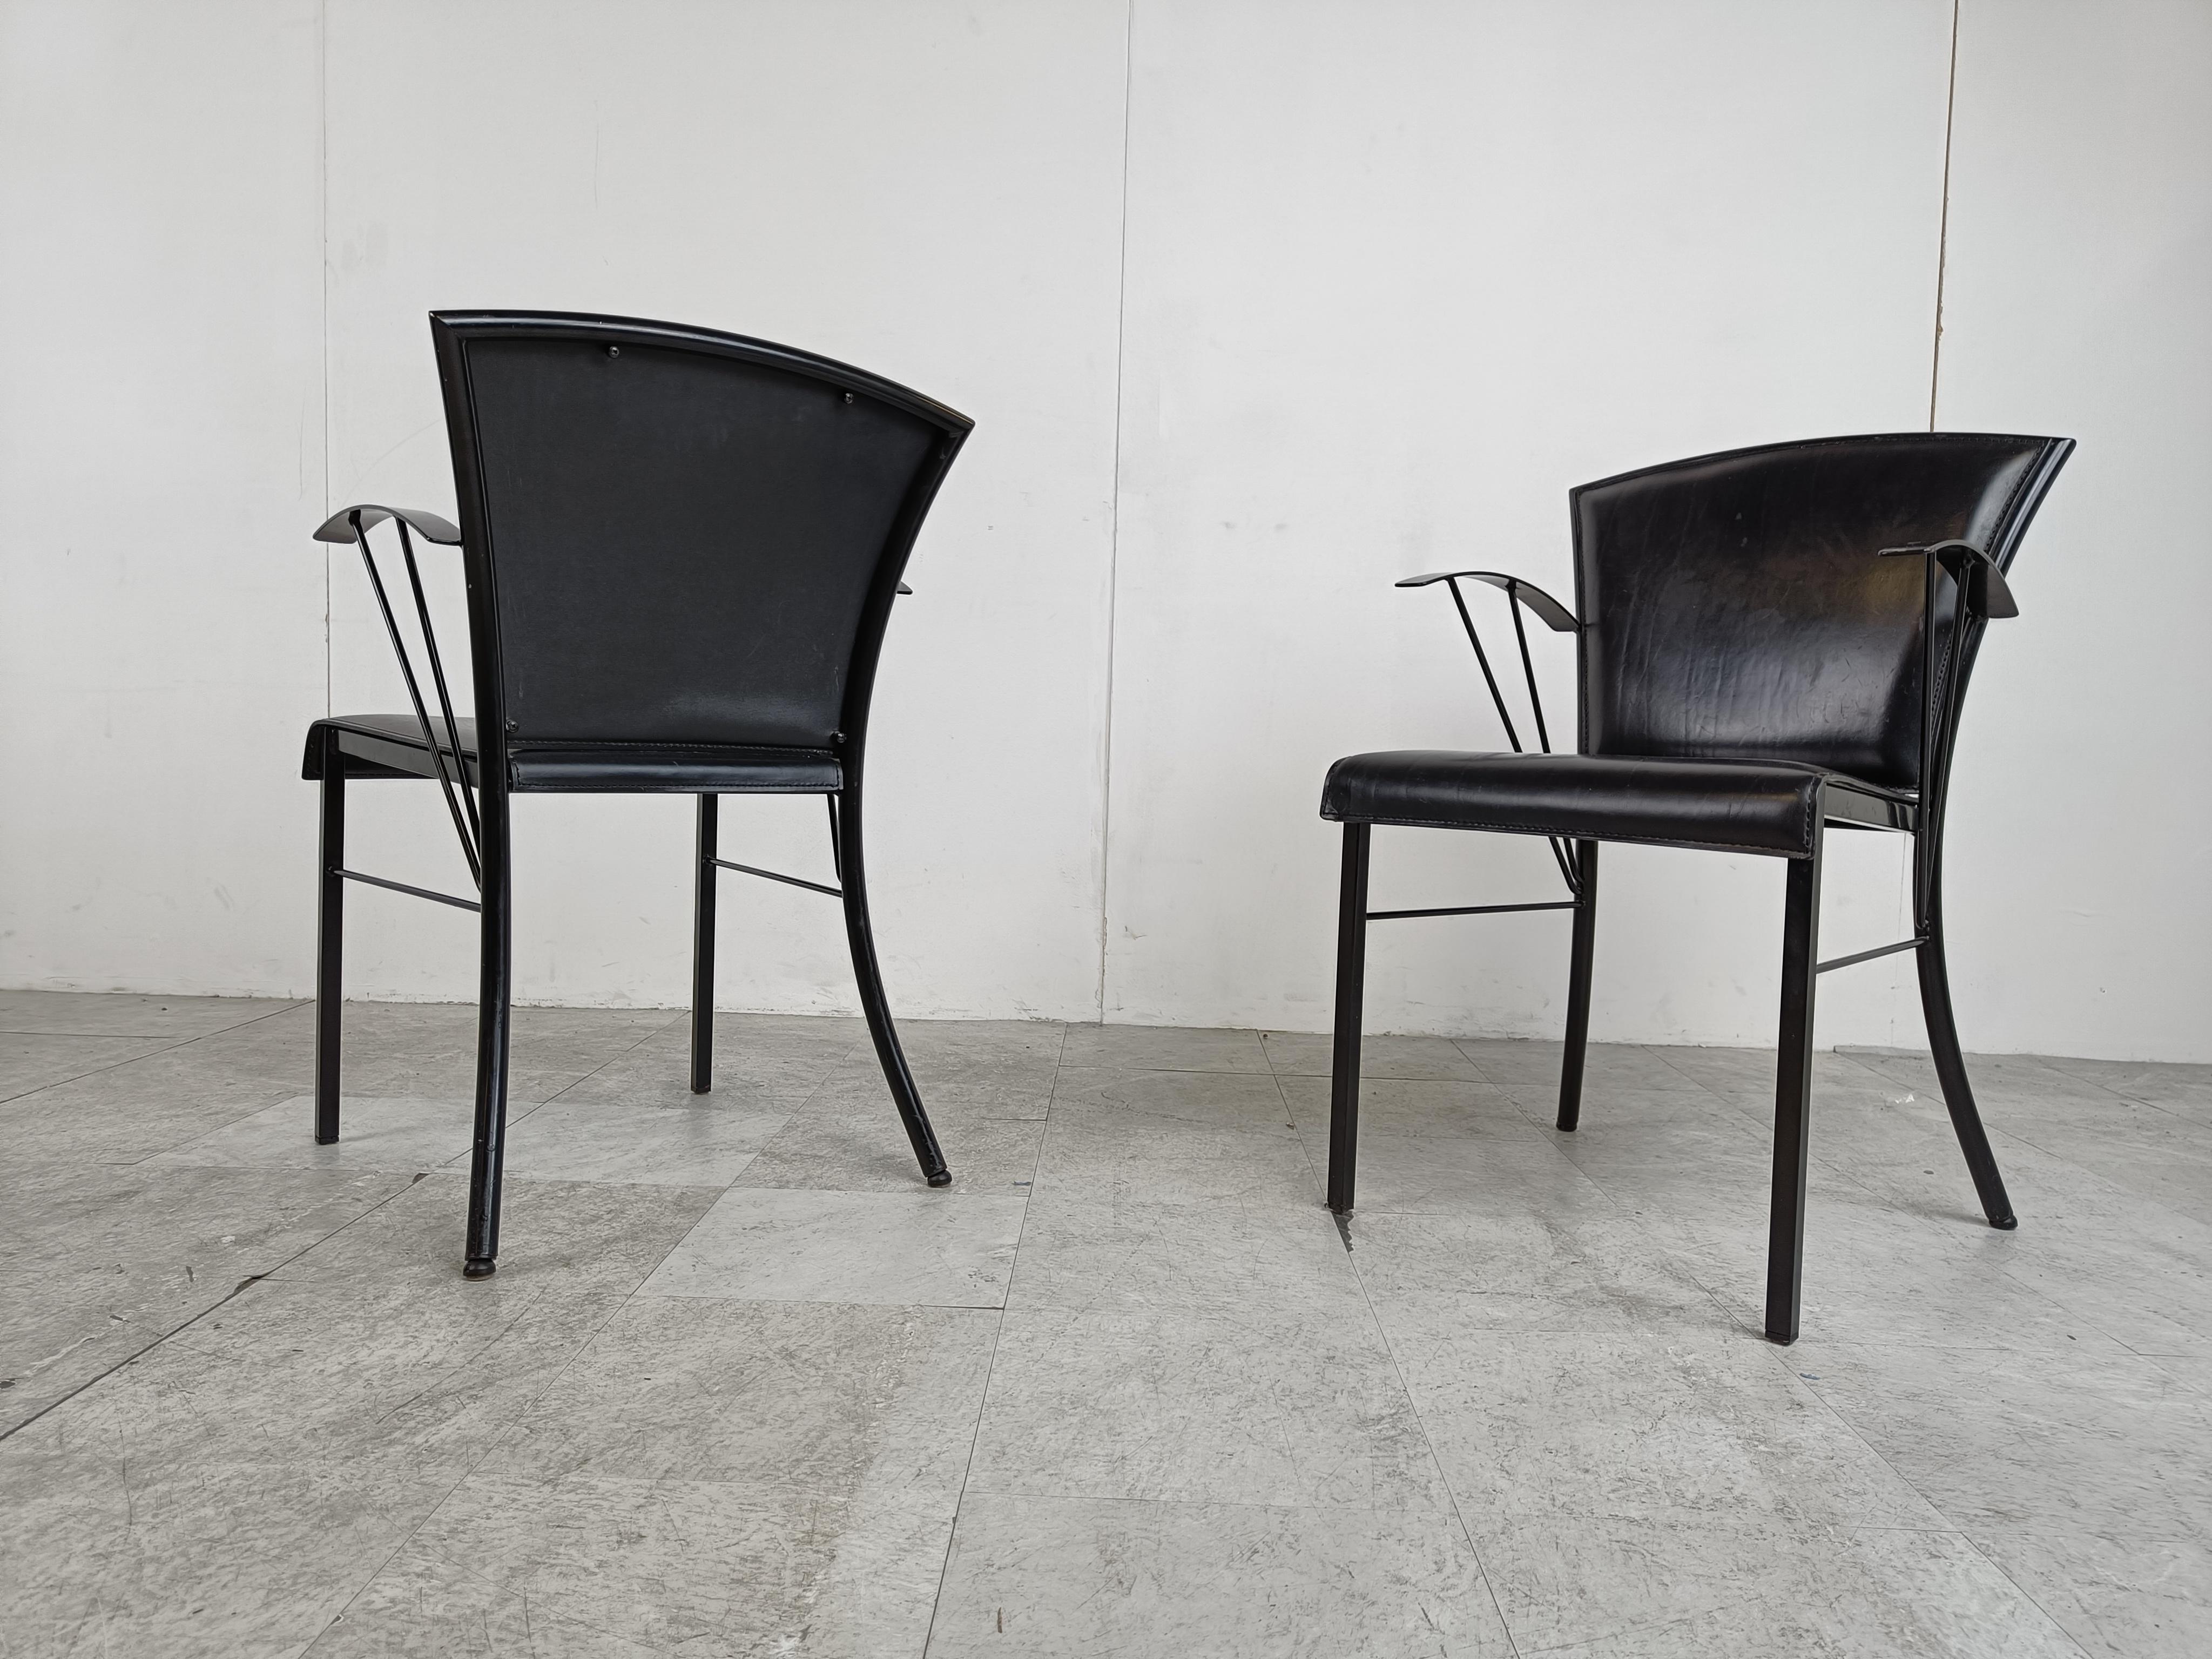 Vintage Black Leather Dining Chairs by Arrben, 1980s For Sale 2